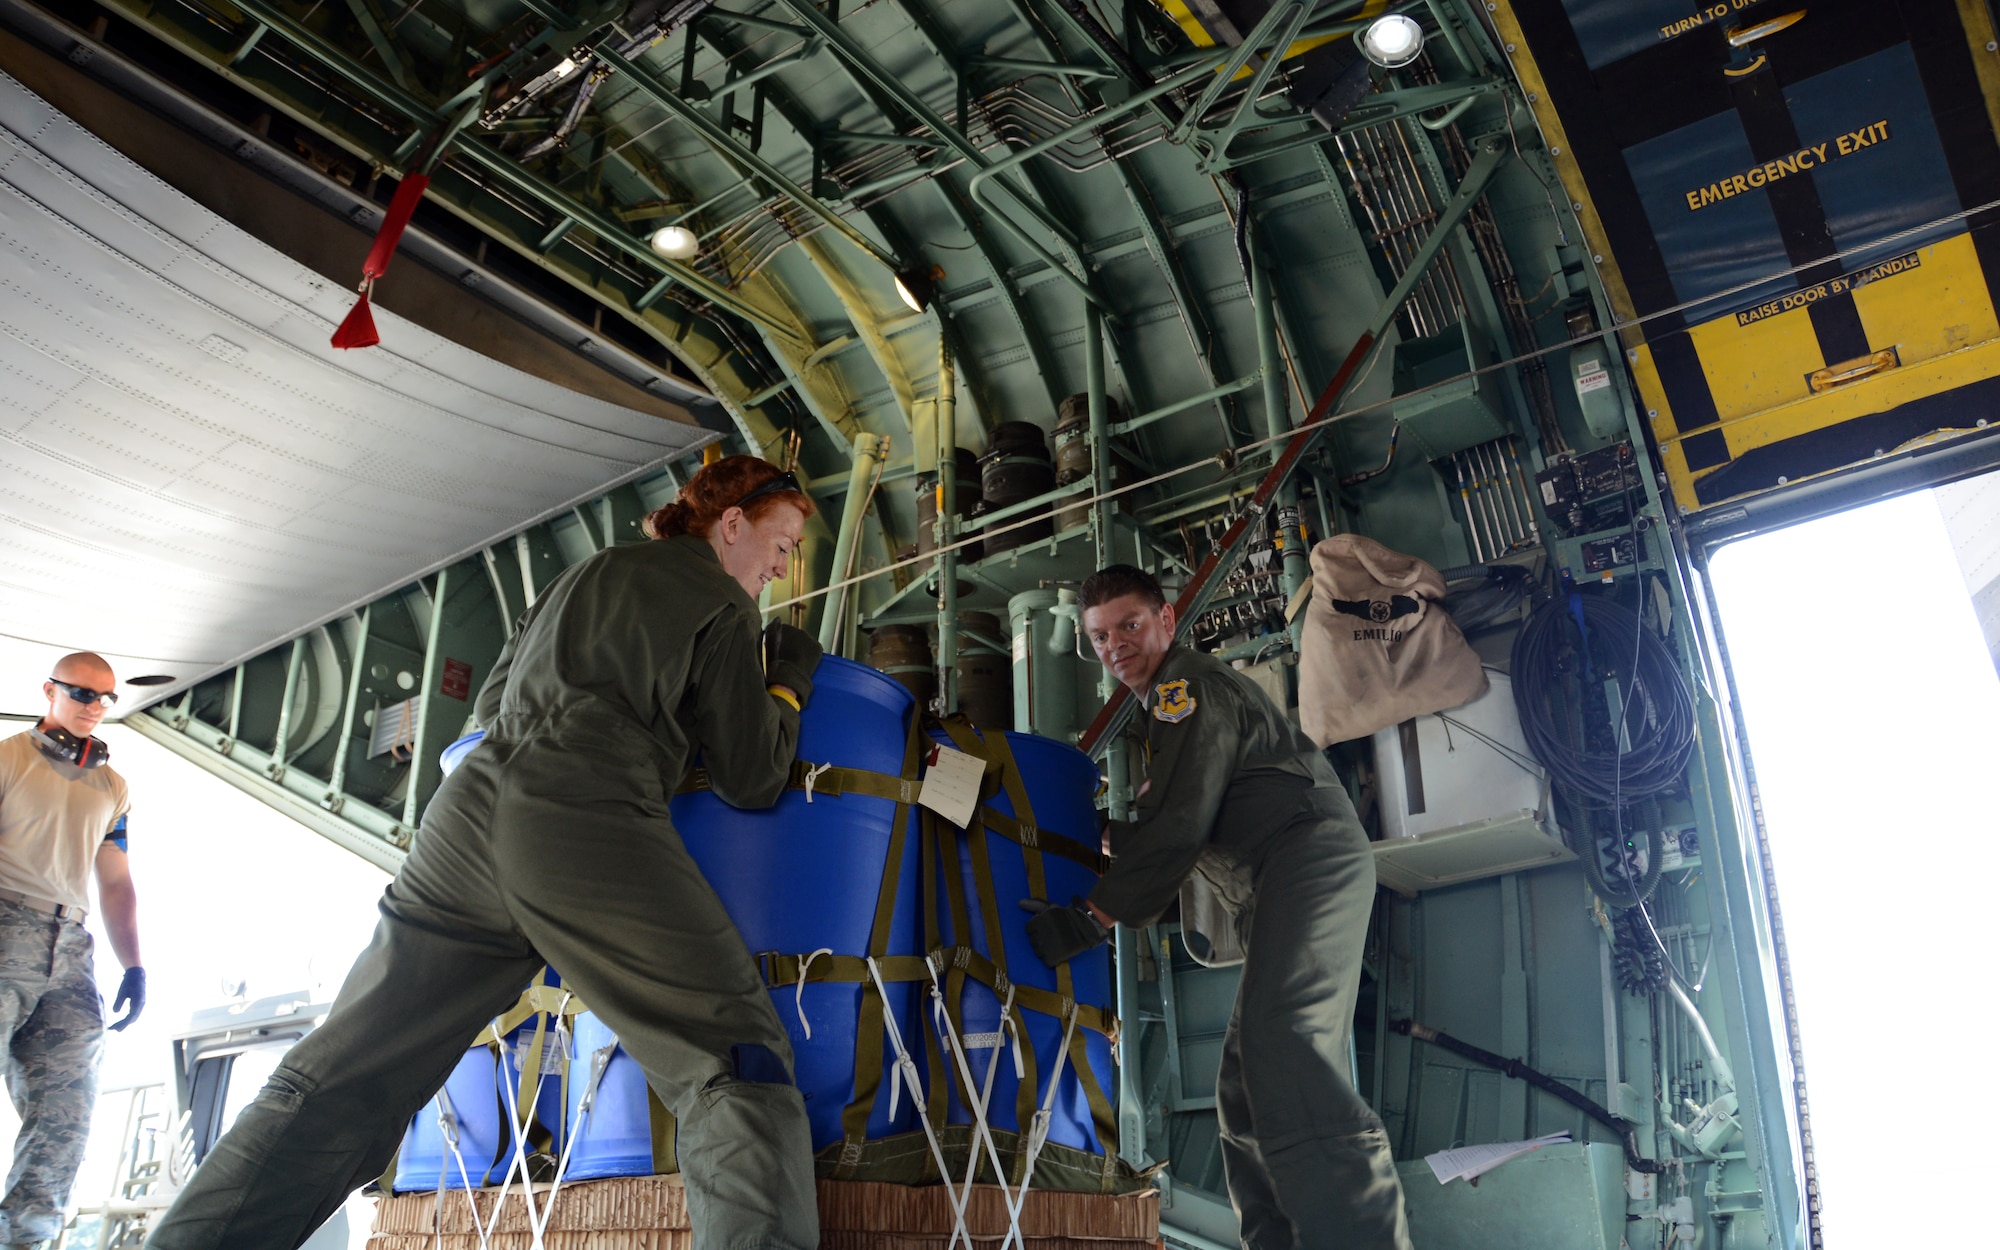 Senior Airman Kaitlin Cardello and Master Sgt. Joseph Amato shift a container delivery system into position on the floor rails of a C-130H Hercules aircraft during an air drop exercise at Bradley Air National Guard Base, East Granby, Connecticut on July 12, 2014. The exercise started with Airmen like Senior Airman Joseph Hamel (far left) loading the CDS onto a transport vehicle and transferring it onto the C-130H. From there, the loadmasters secure and position the load for air delivery. (Air National Guard Photo by Tech. Sgt. Joshua Mead/Released)